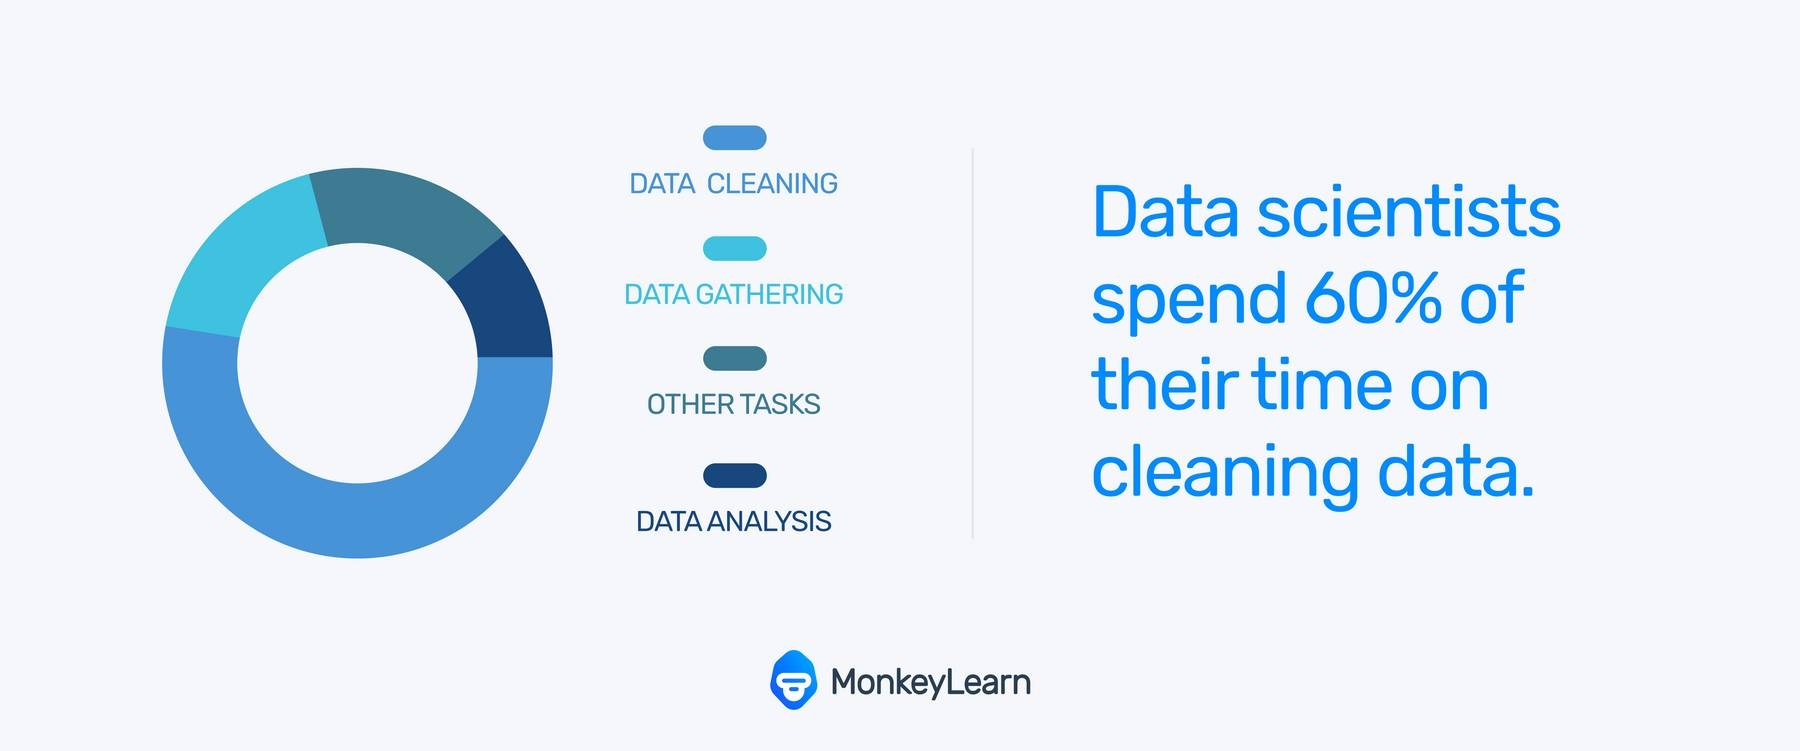 Data Scientists spend 60% of their time cleaning data. I.e. the majority of their time.